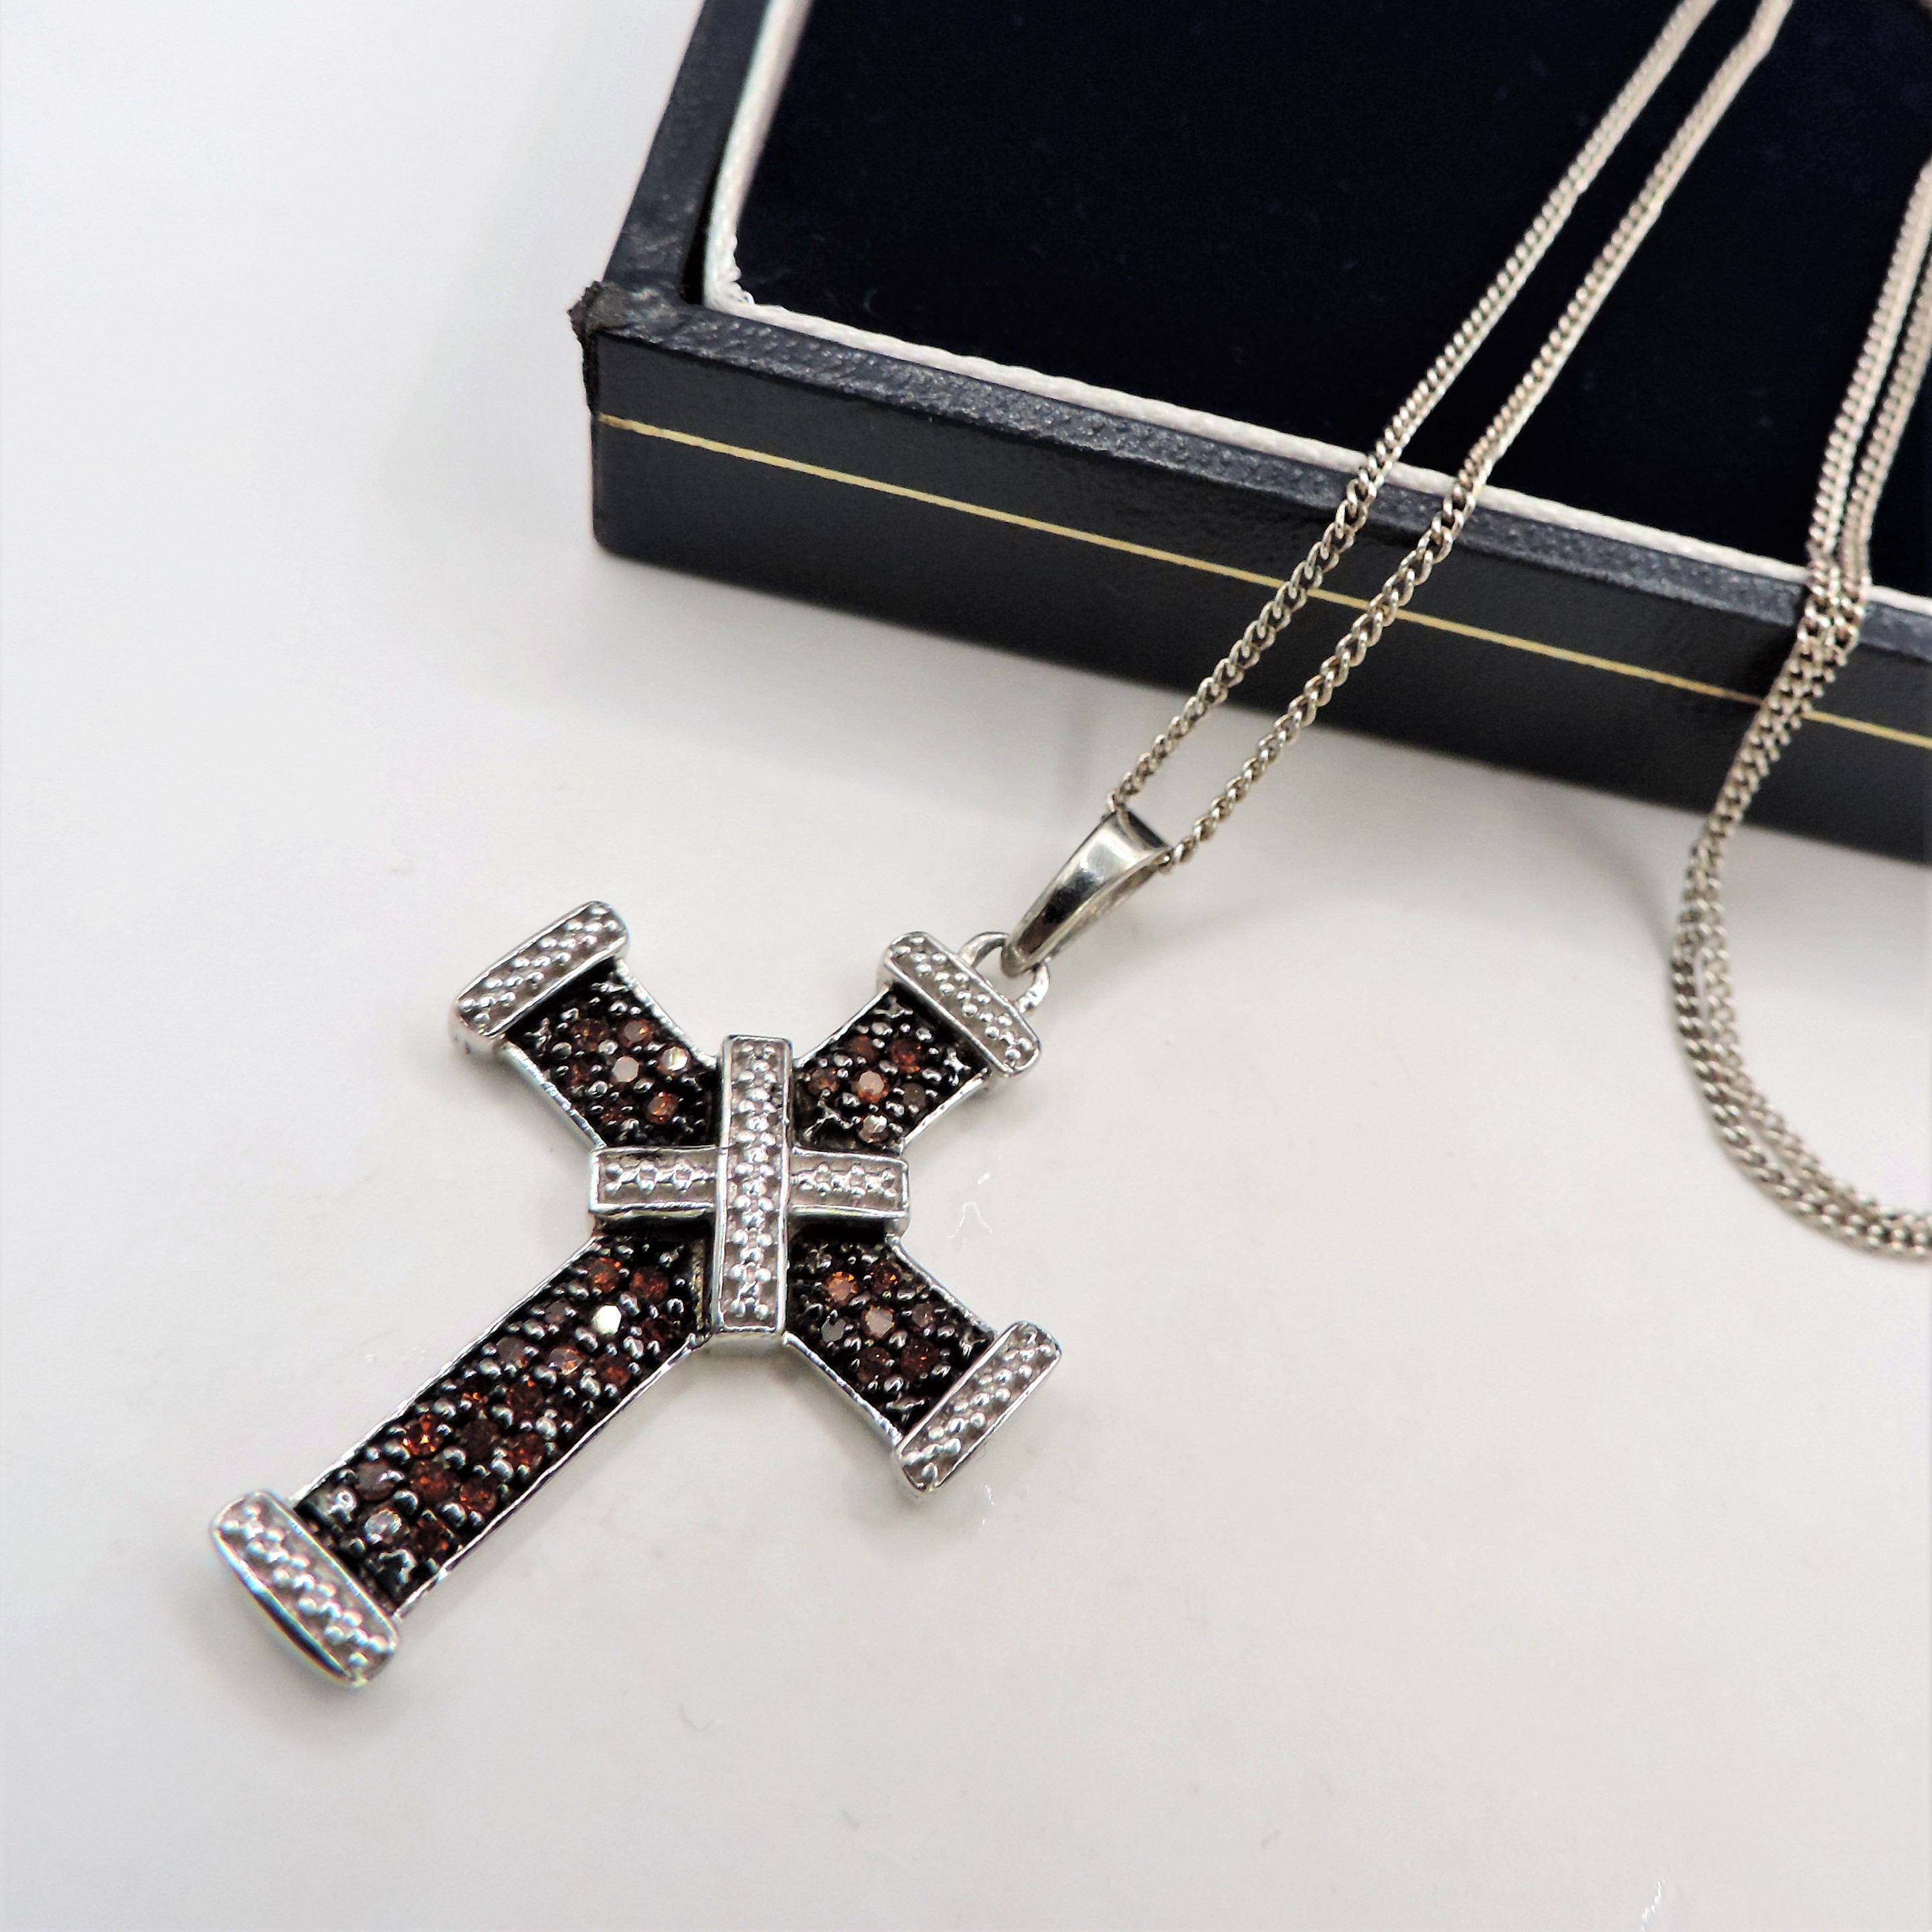 Platinum on Silver Cognac Diamond Cross Pendant Necklace 'New' with Gift Box - Image 2 of 3